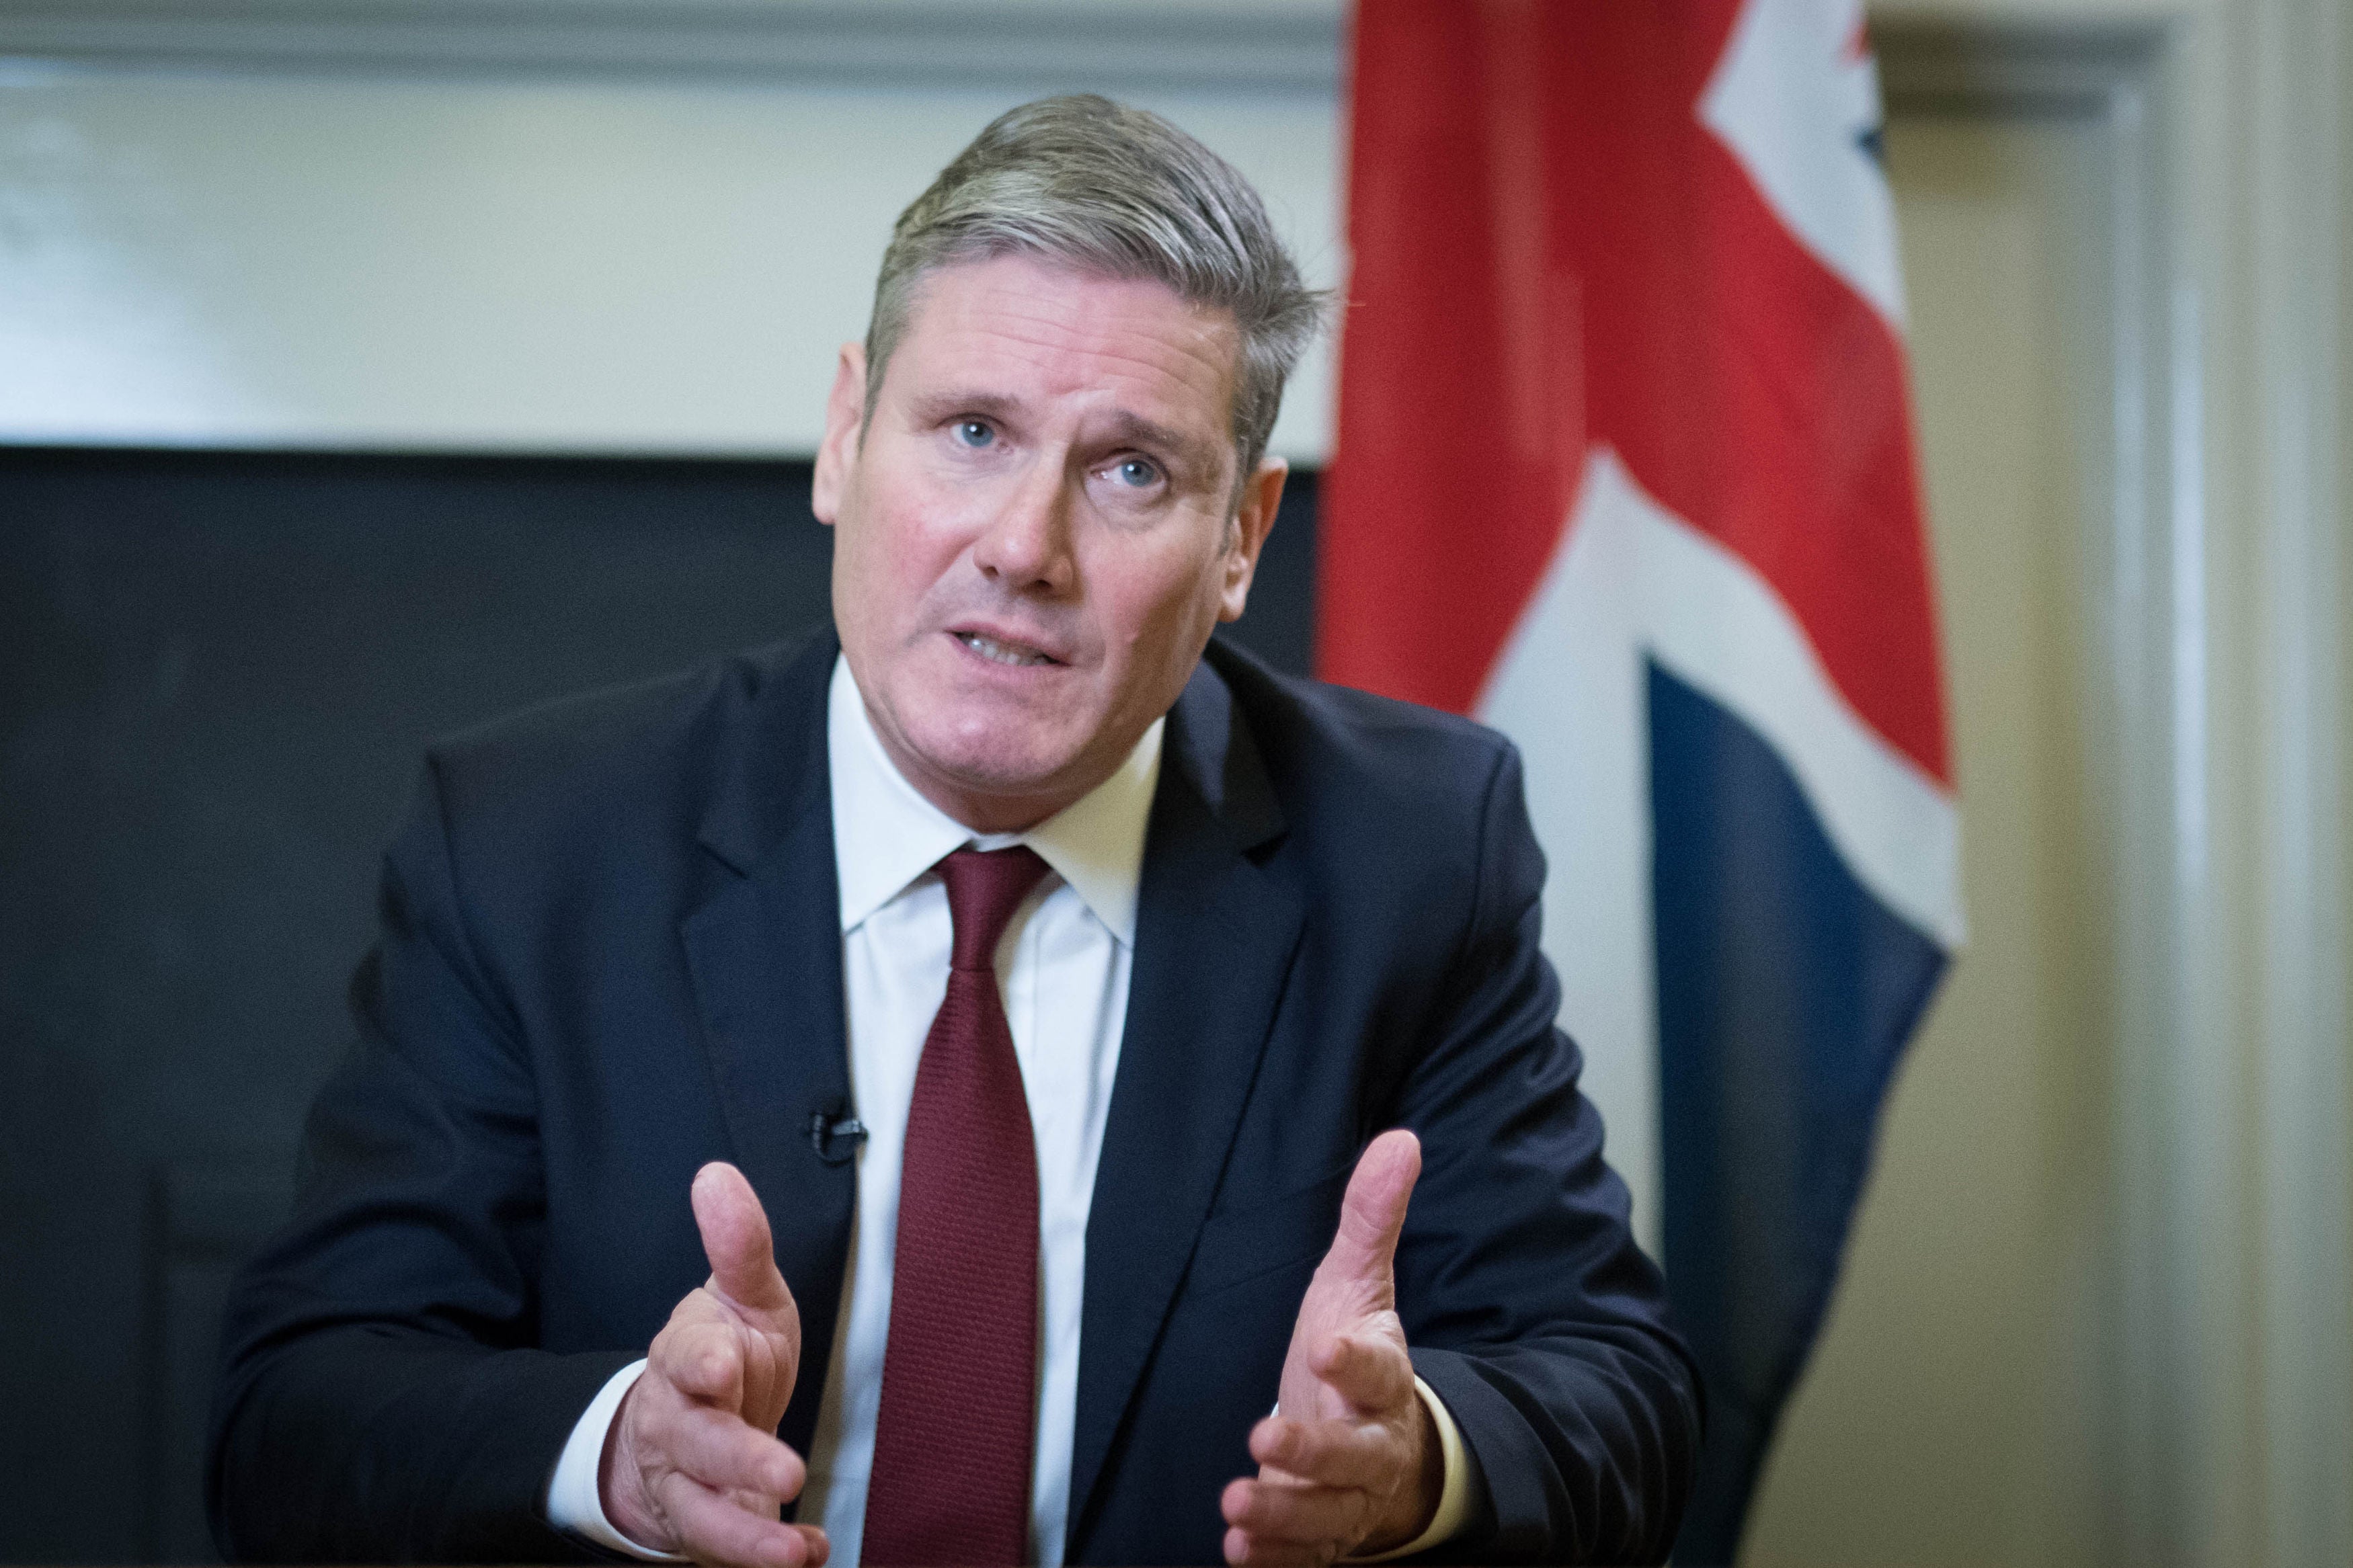 Keir Starmer has an opportunity to help build a better Britain post-pandemic